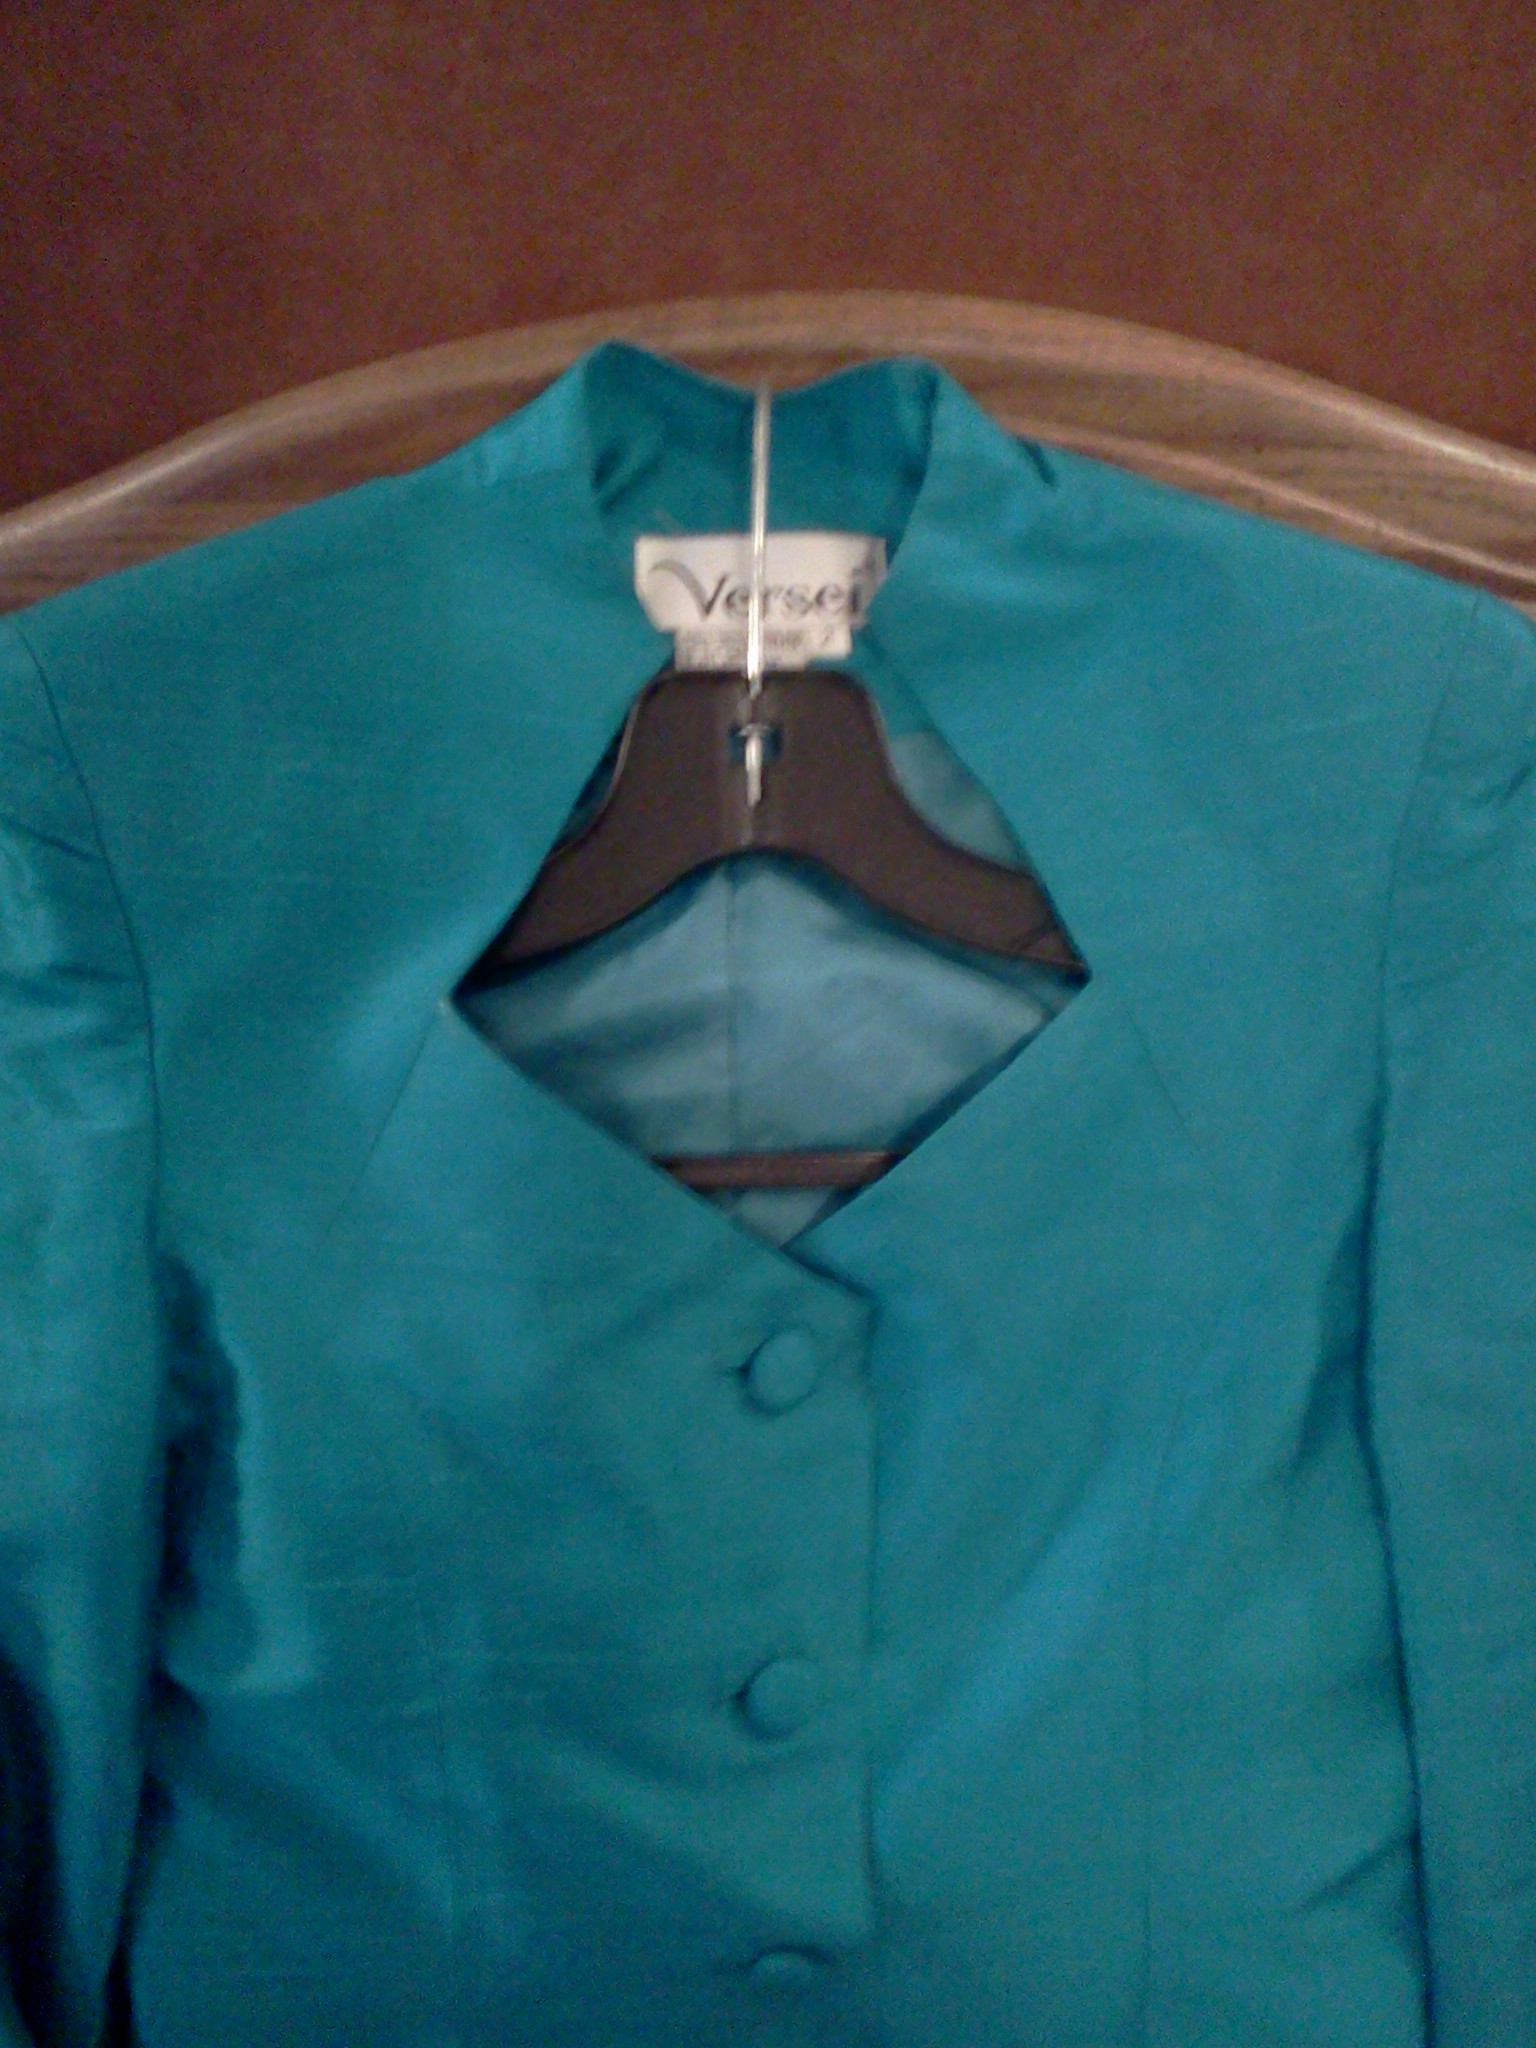 Girls size 2 Teal Suit